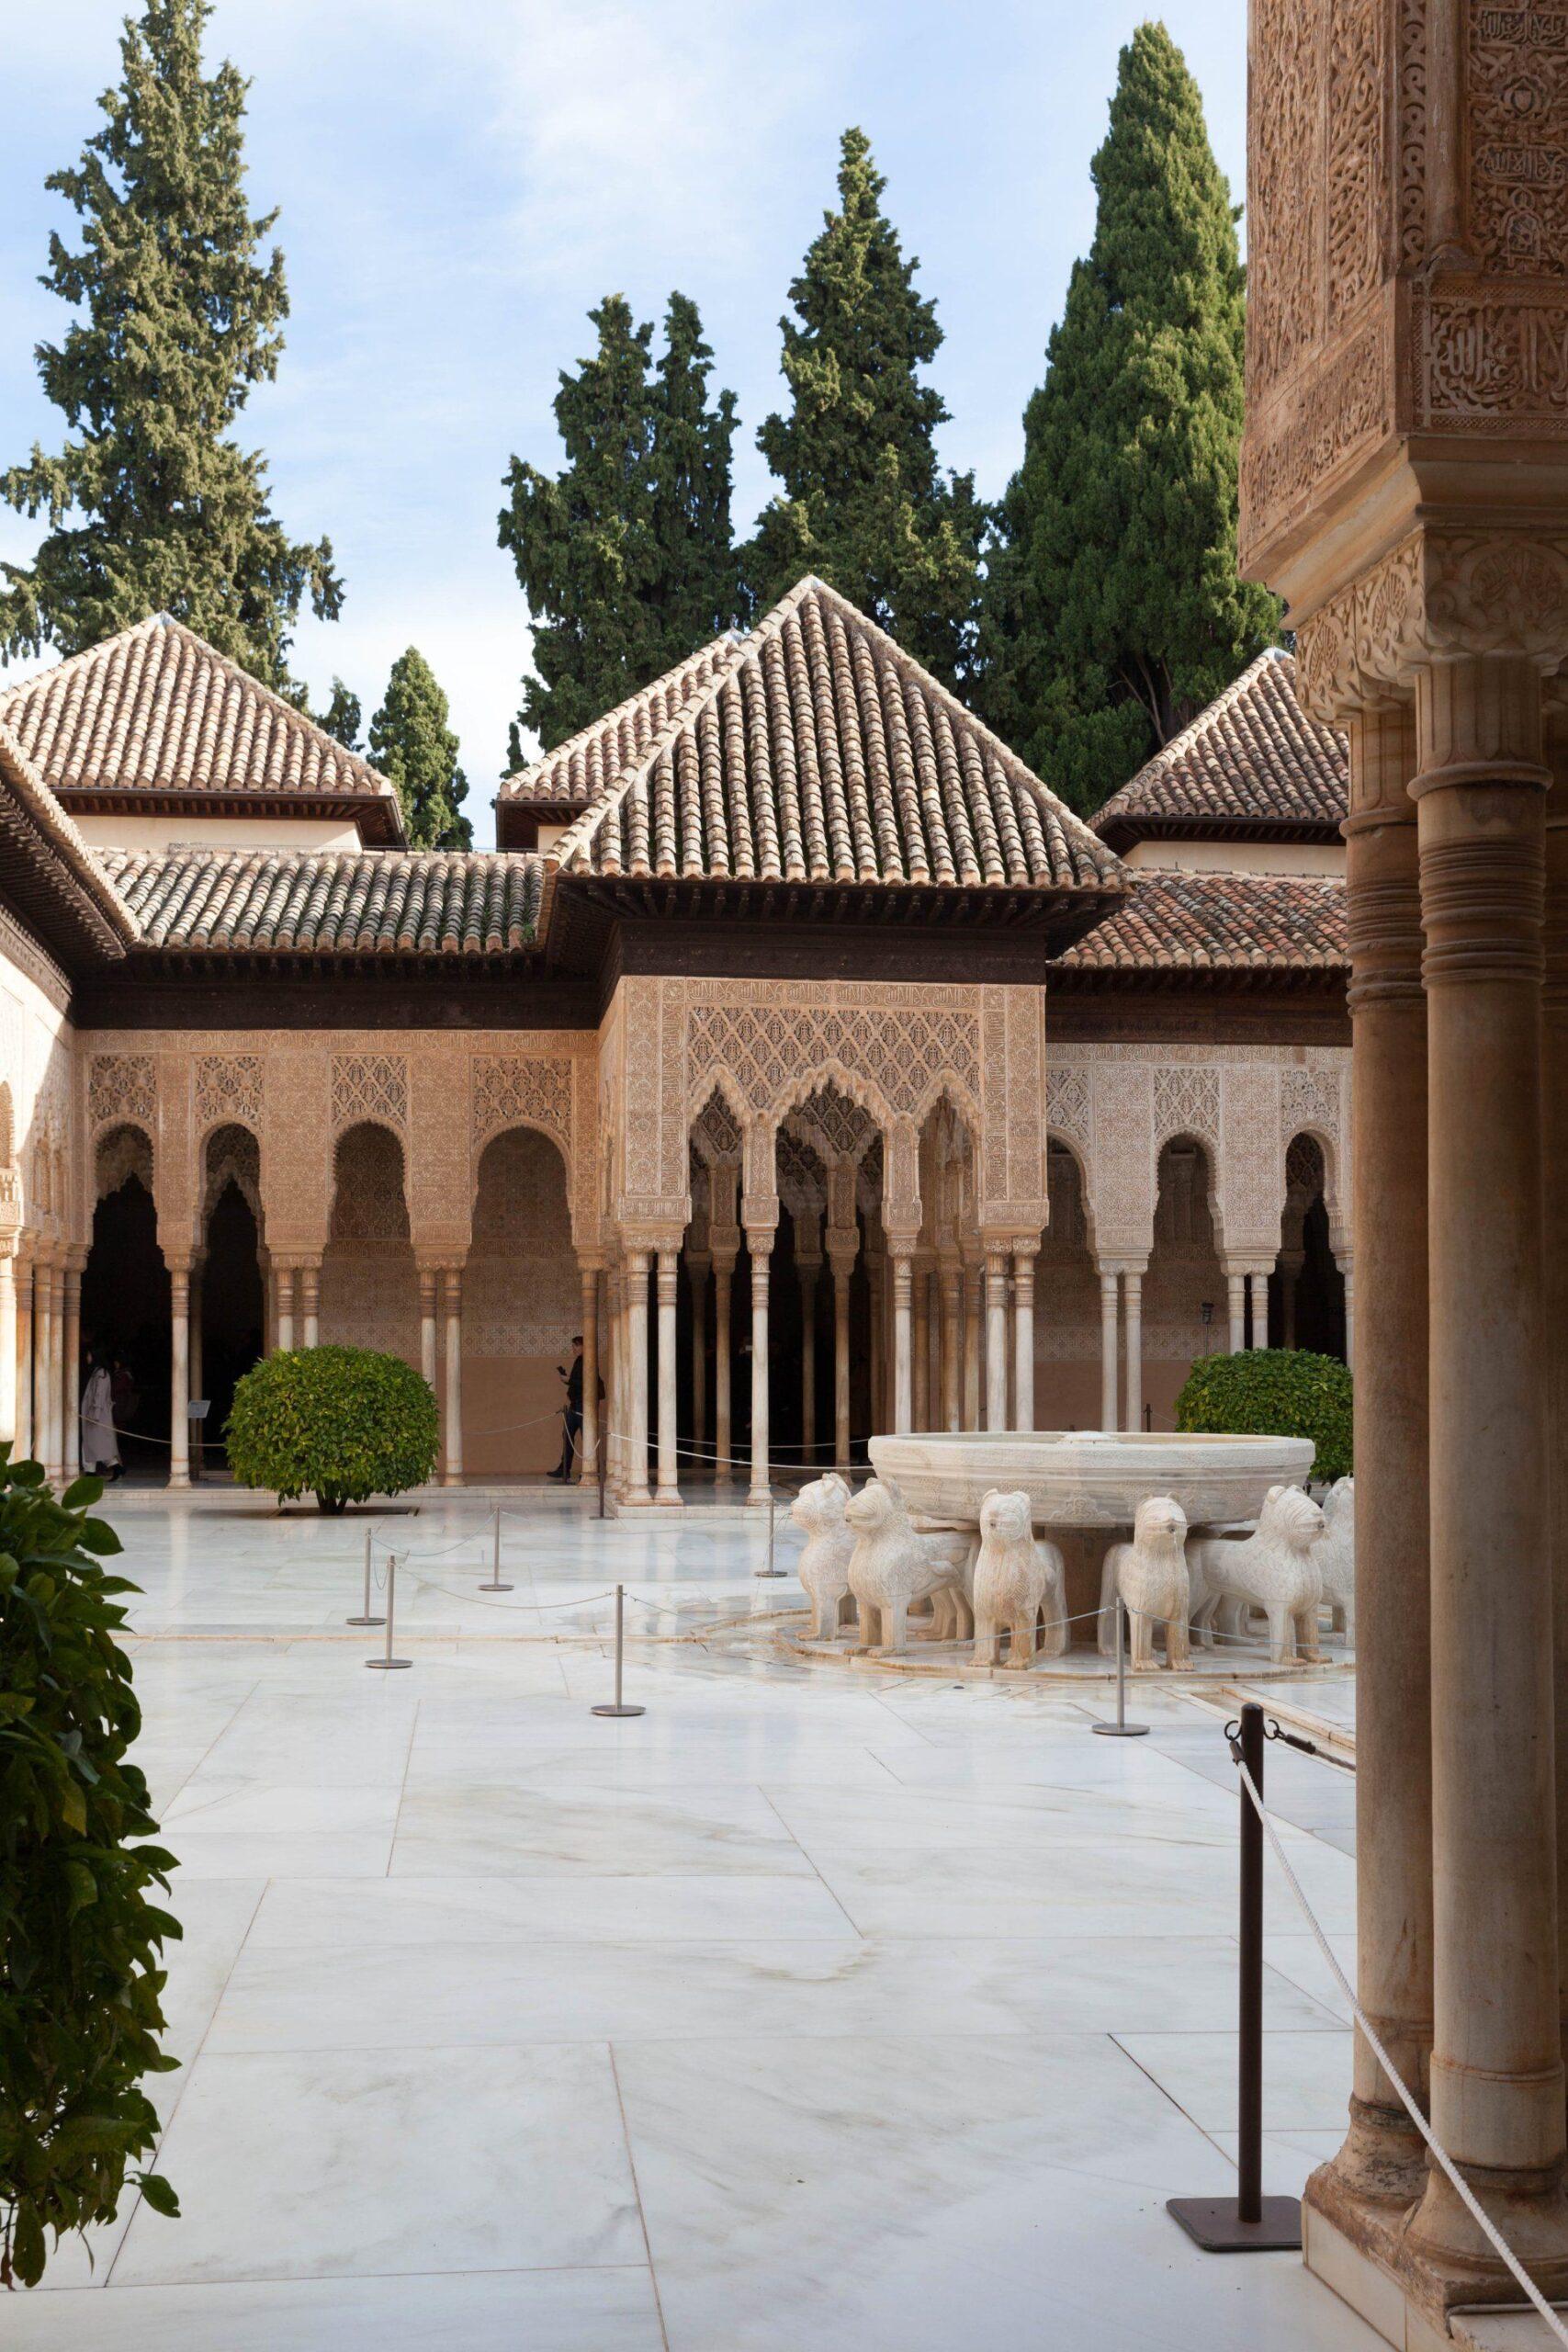 The ultimate guide on how to visit The Alhambra in Spain